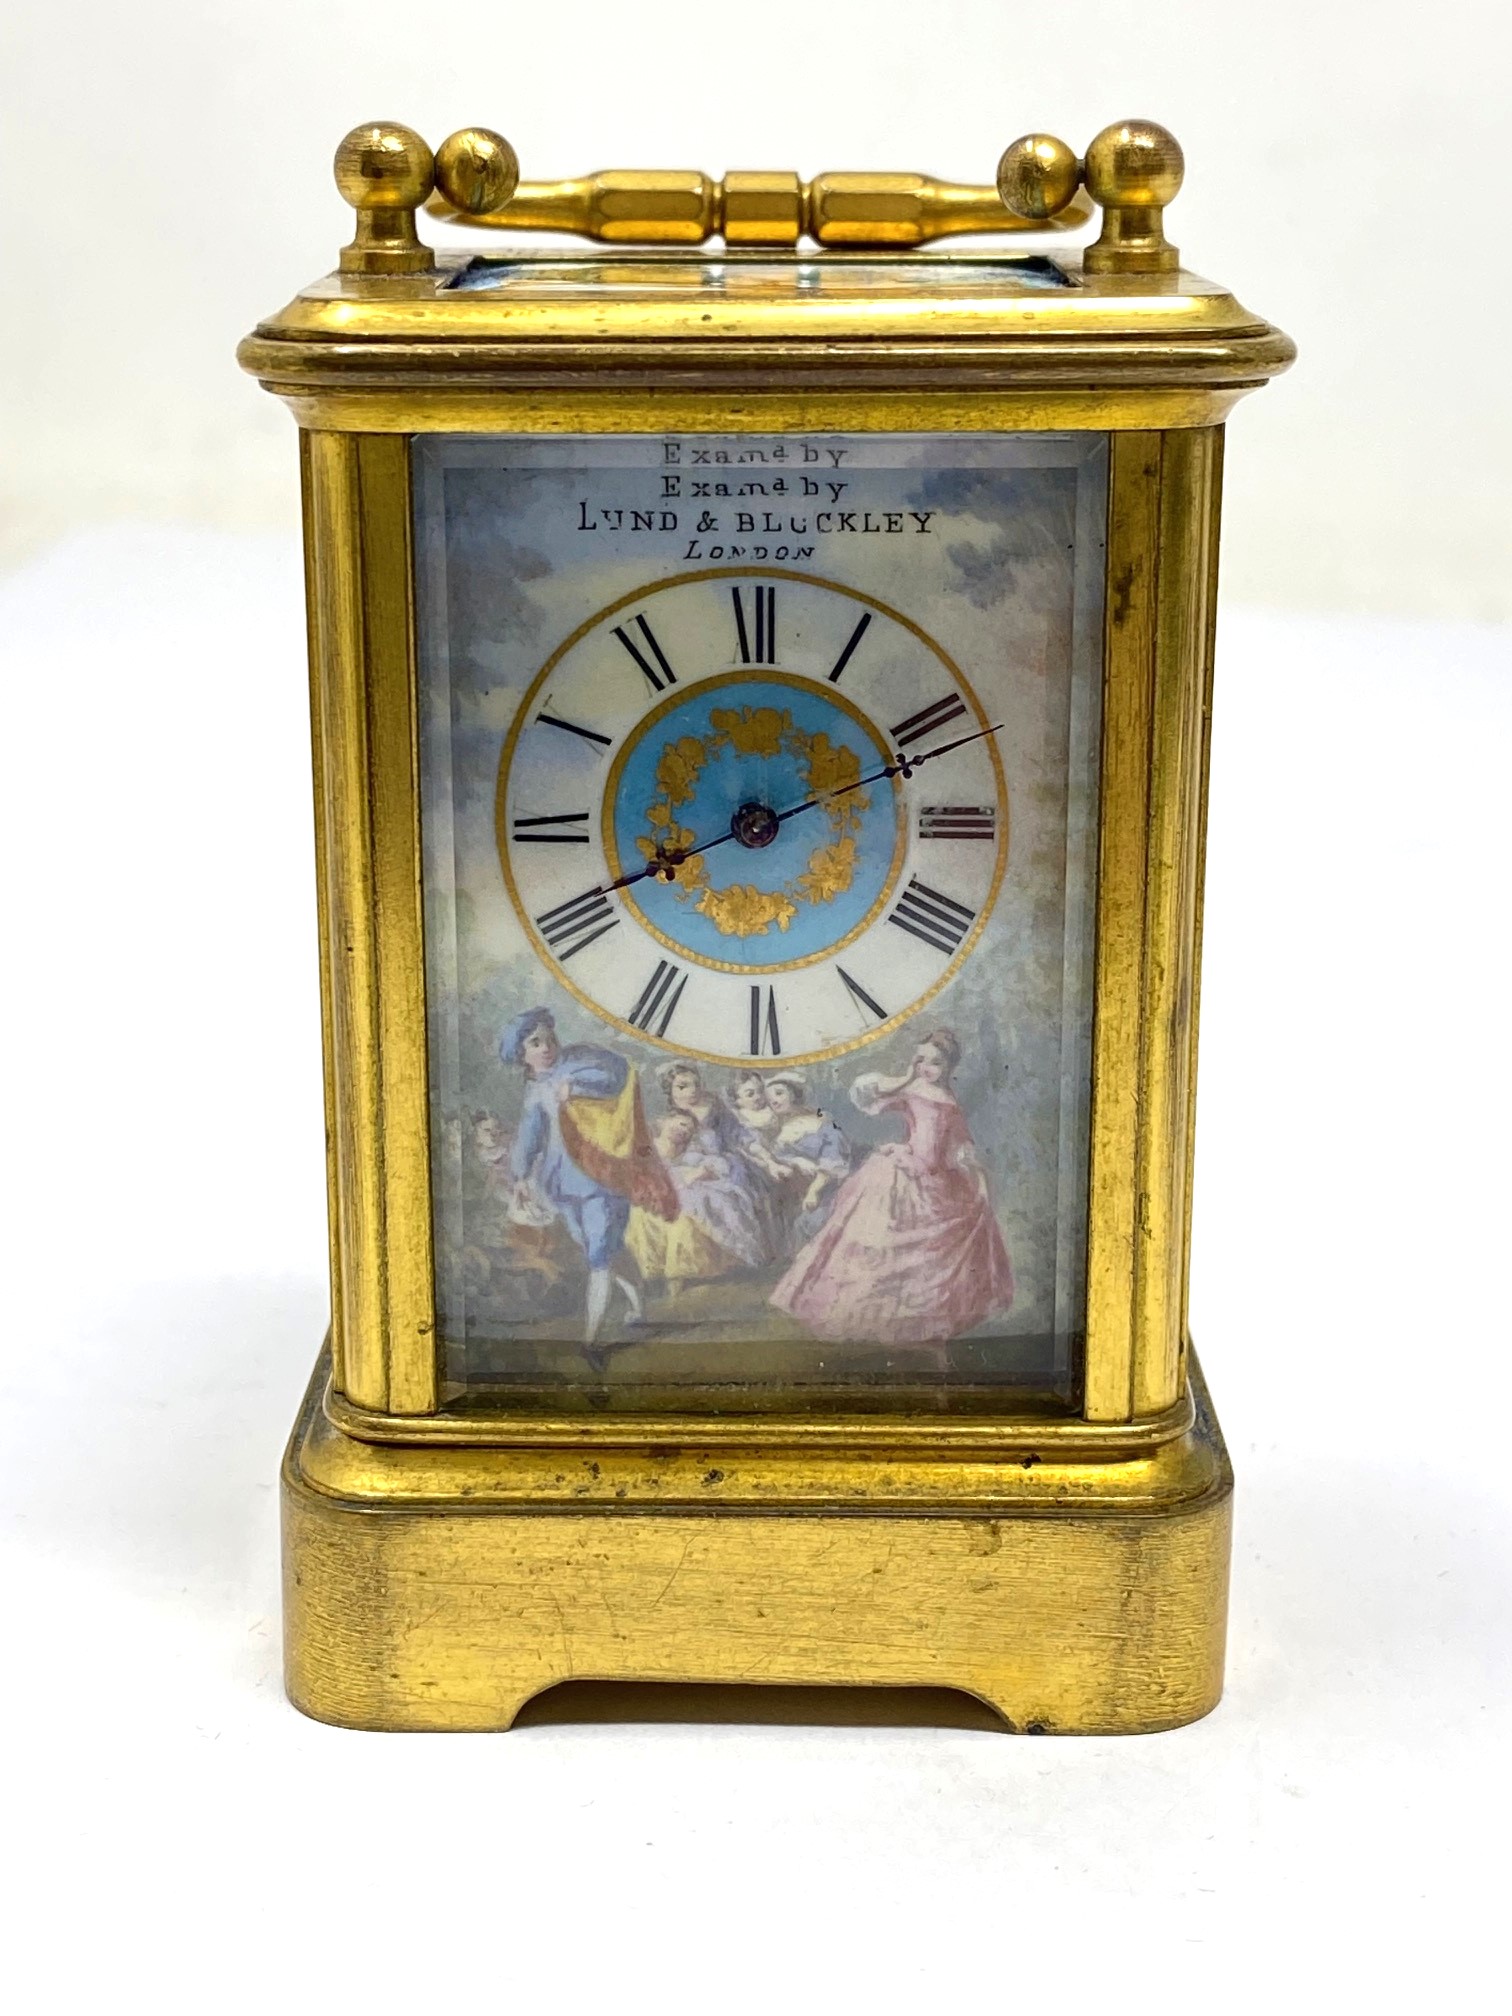 A FRENCH GILT-BRASS AND ENAMEL MINIATURE CARRIAGE CLOCK, PERHAPS J. DEJARDIN, PARIS, FOR RETAIL BY - Image 4 of 8